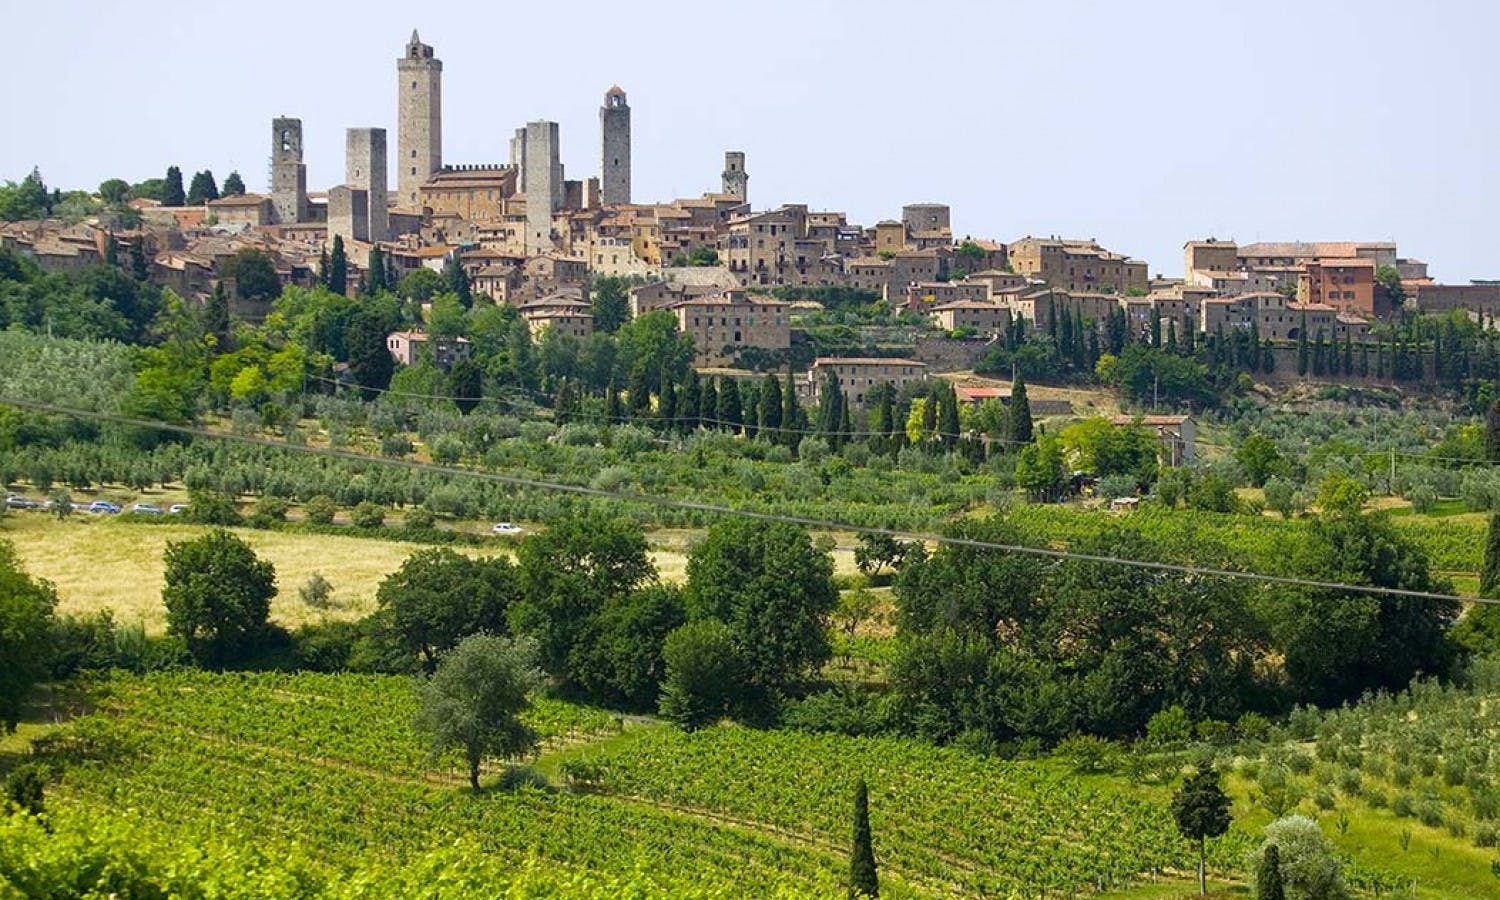 San Gimignano, Chianti and Montalcino tour from Siena with wine tasting and light lunch-3